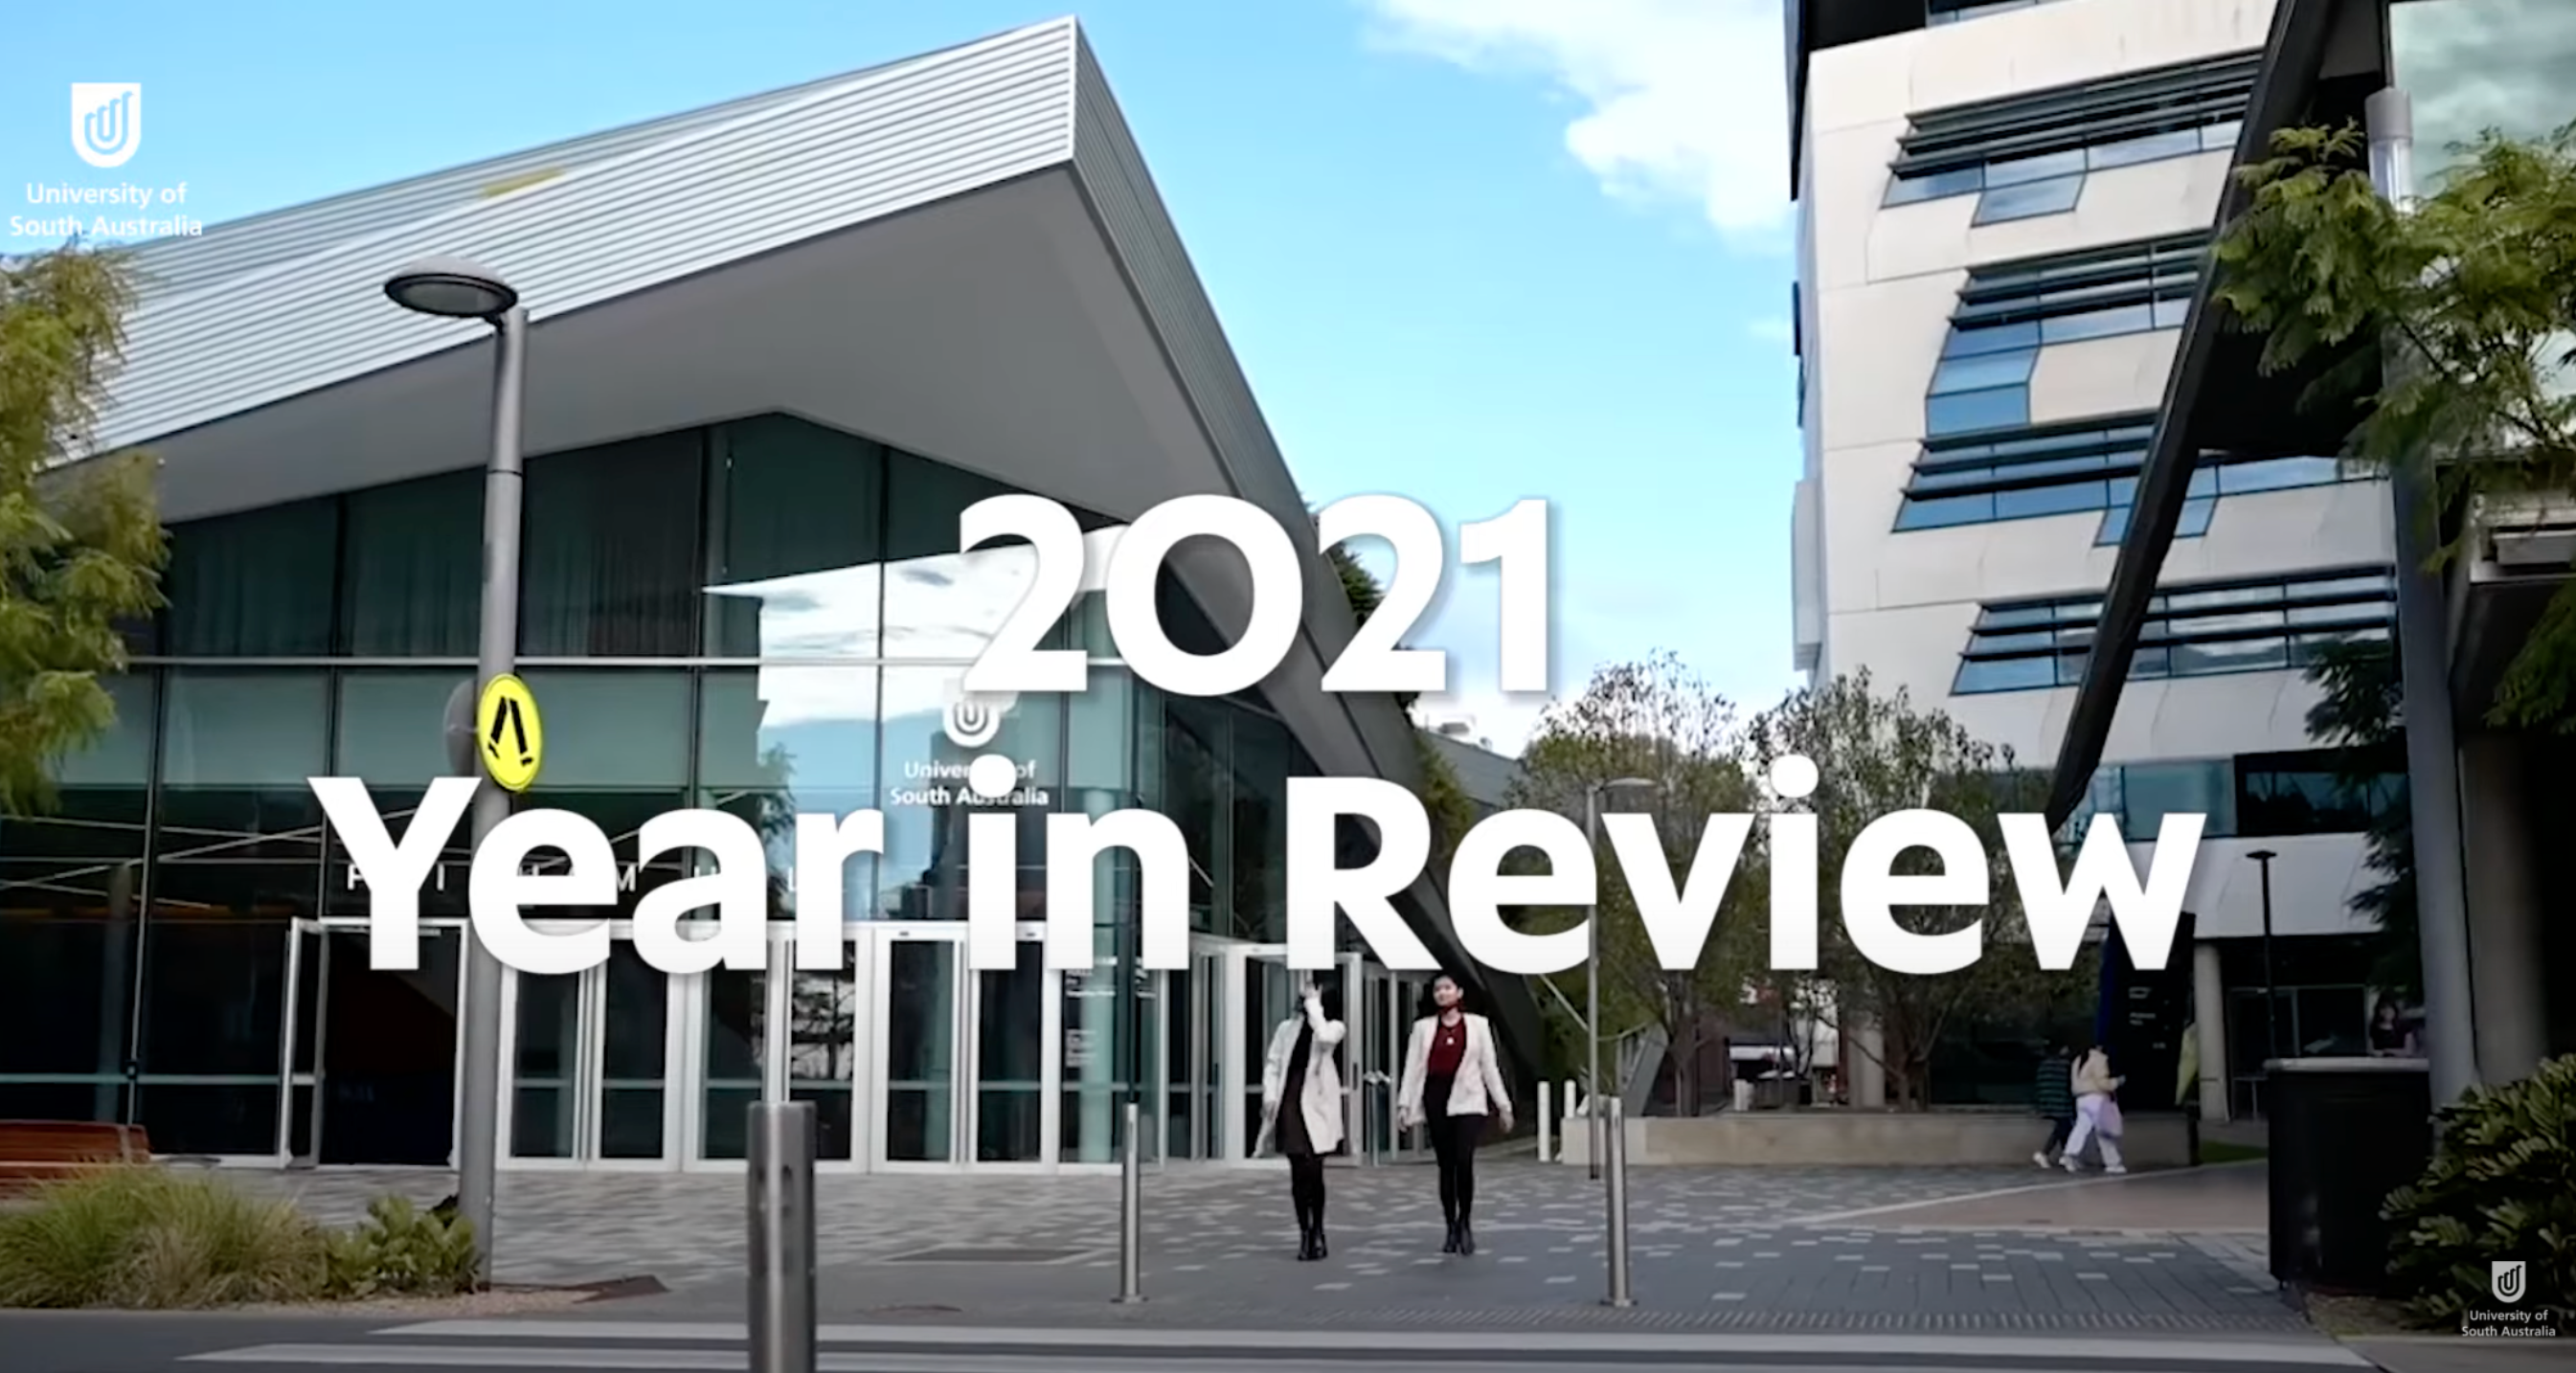 UniSA 2021 Year in Review